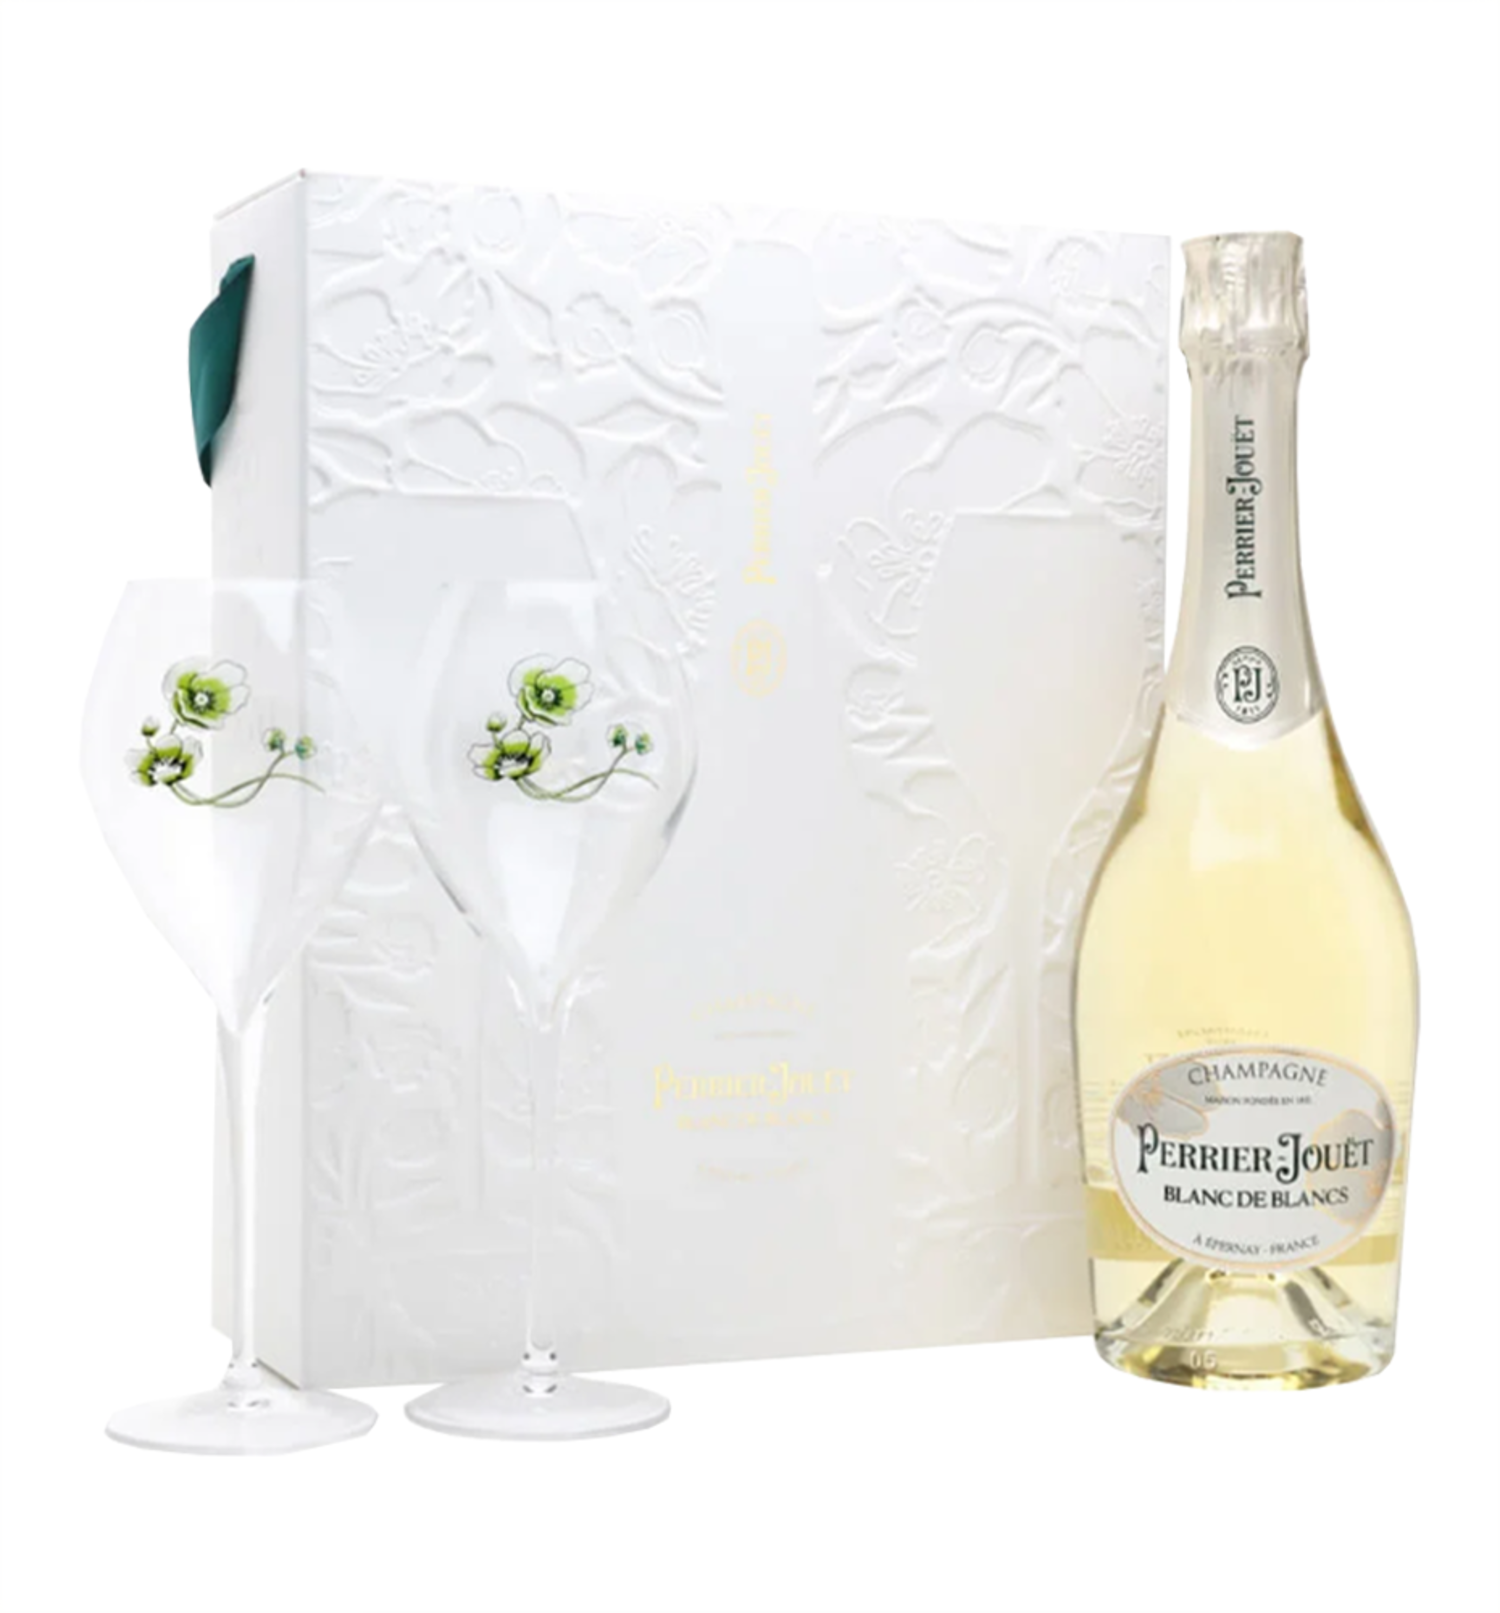 Perrier-Jouet Blanc de Blancs Champagne (gift set with two flutes) - The  Corkery Wine & Spirits Inc., New York, NY, New York, NY